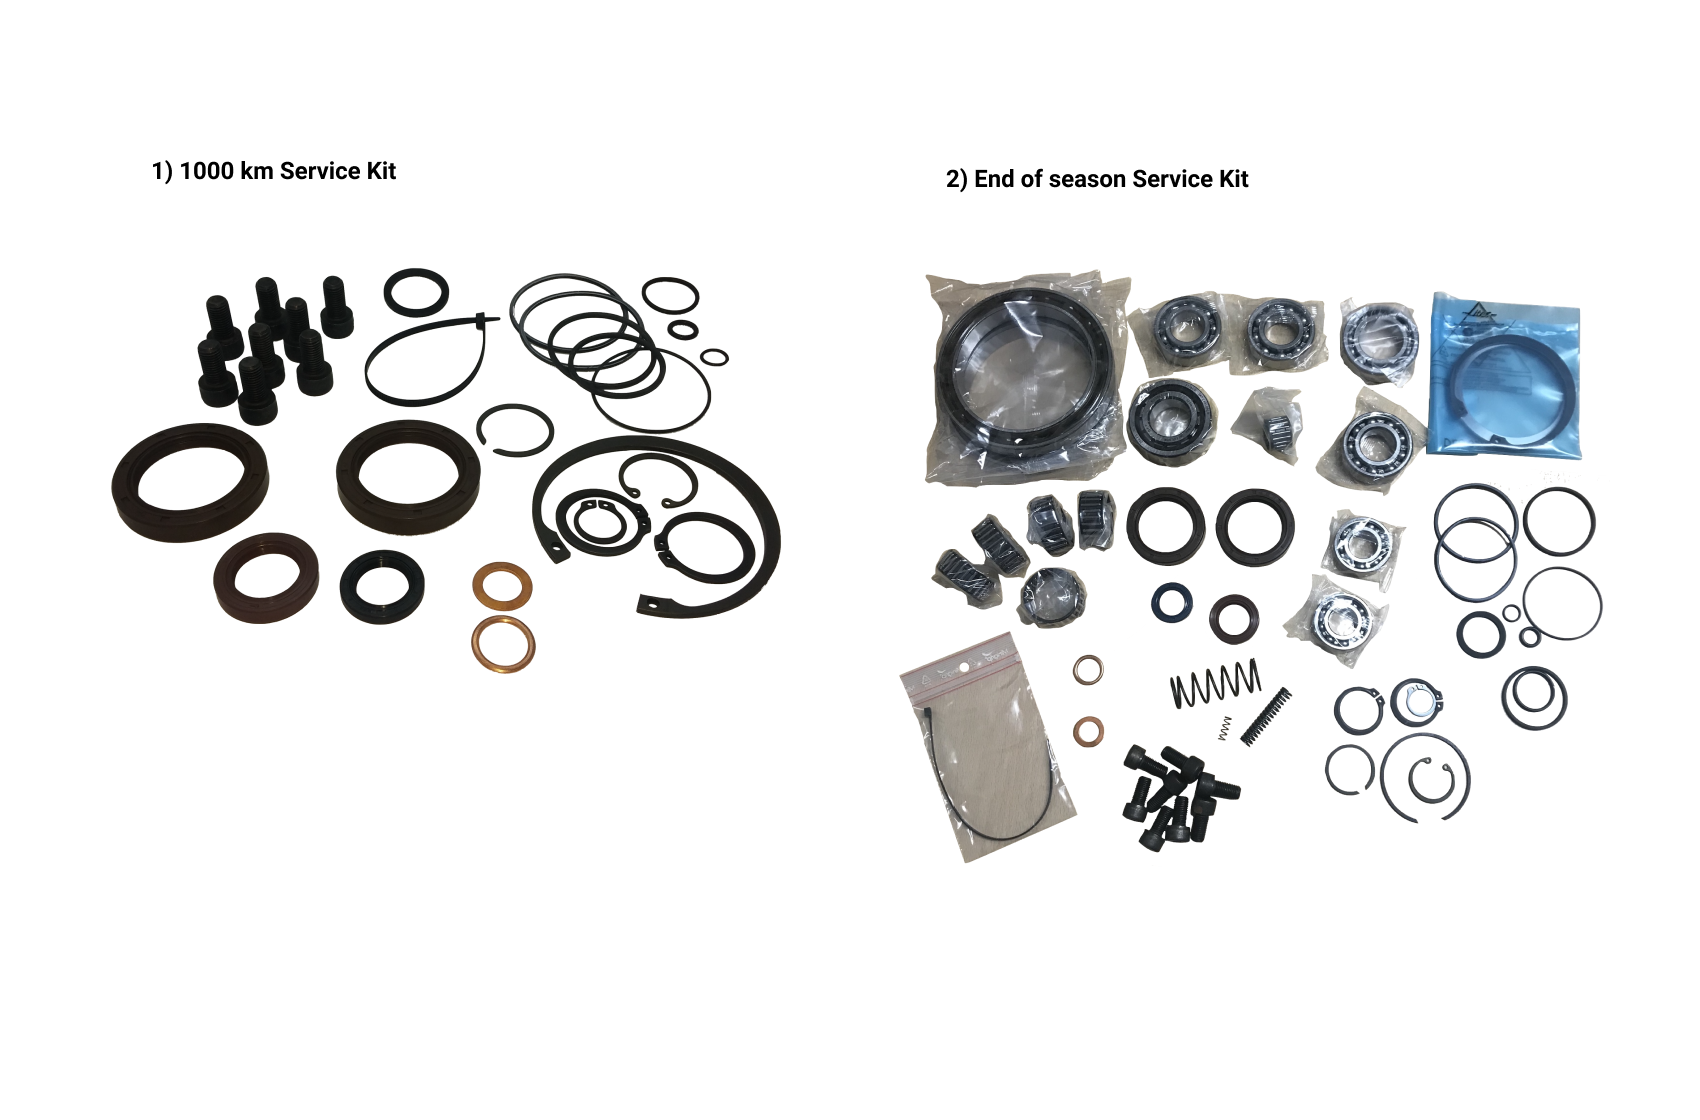 Gearbox Service Kits